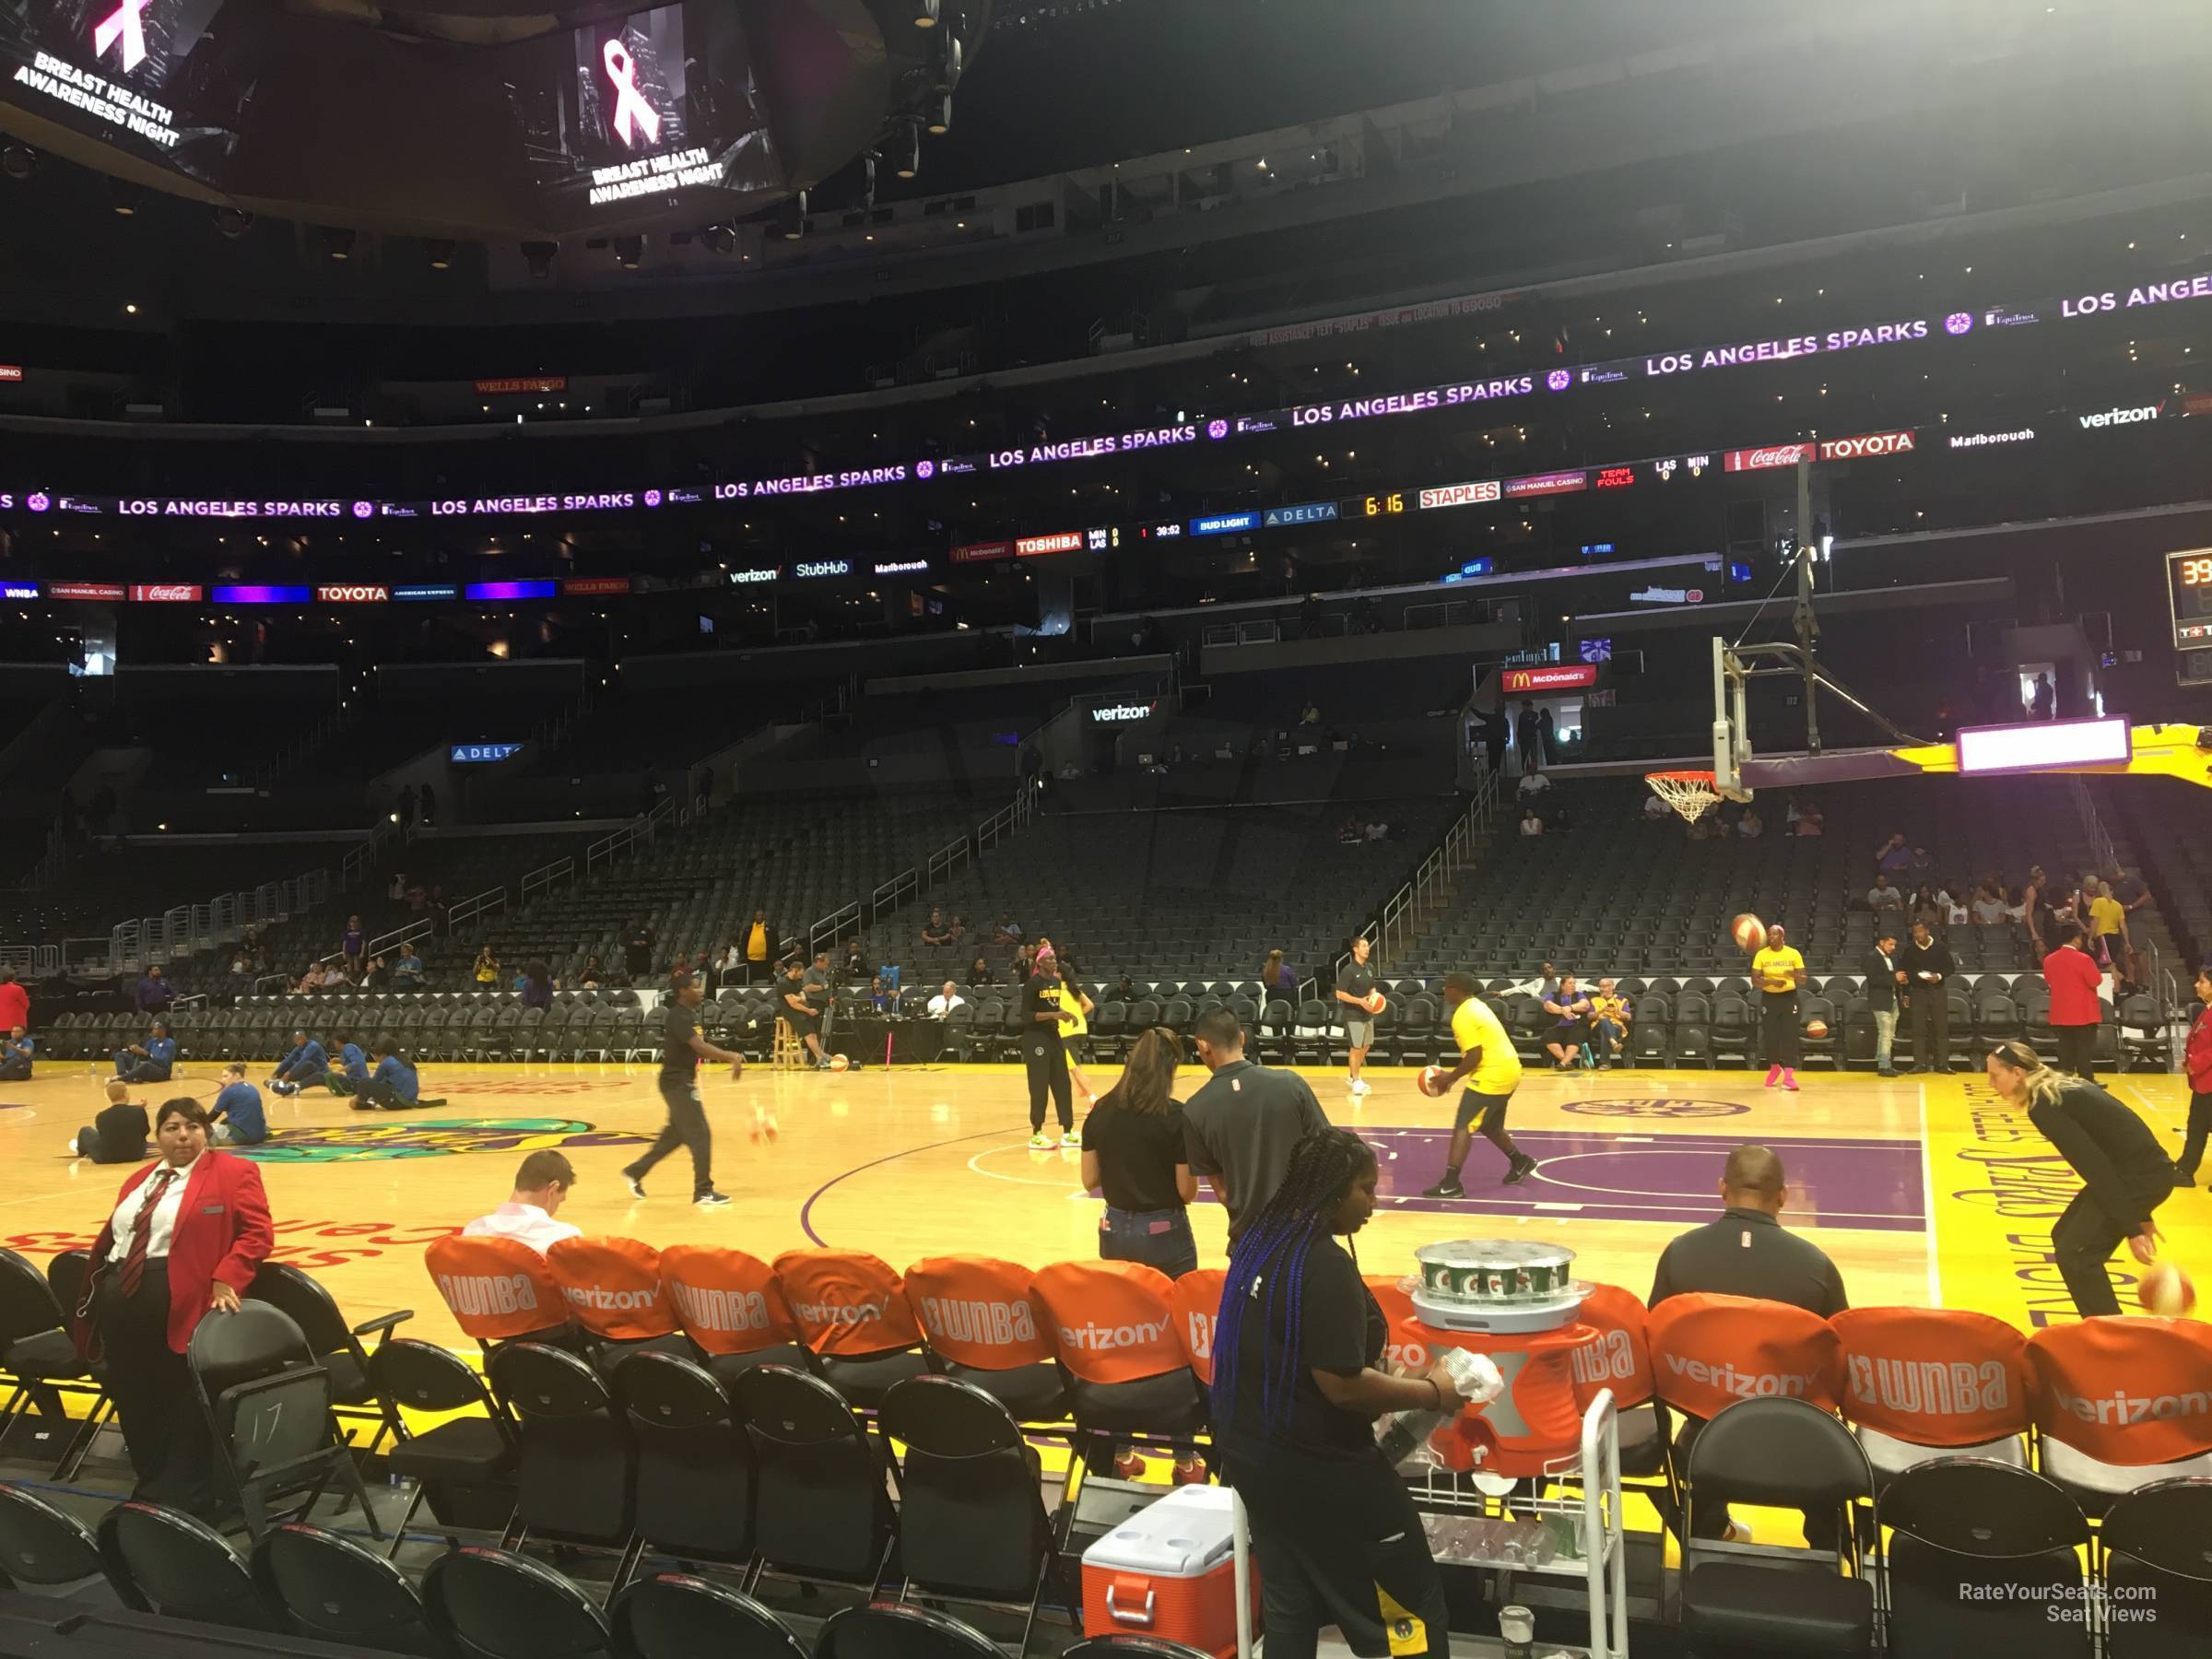 Staples Center Section 119 - Clippers/Lakers - RateYourSeats.com2400 x 1800